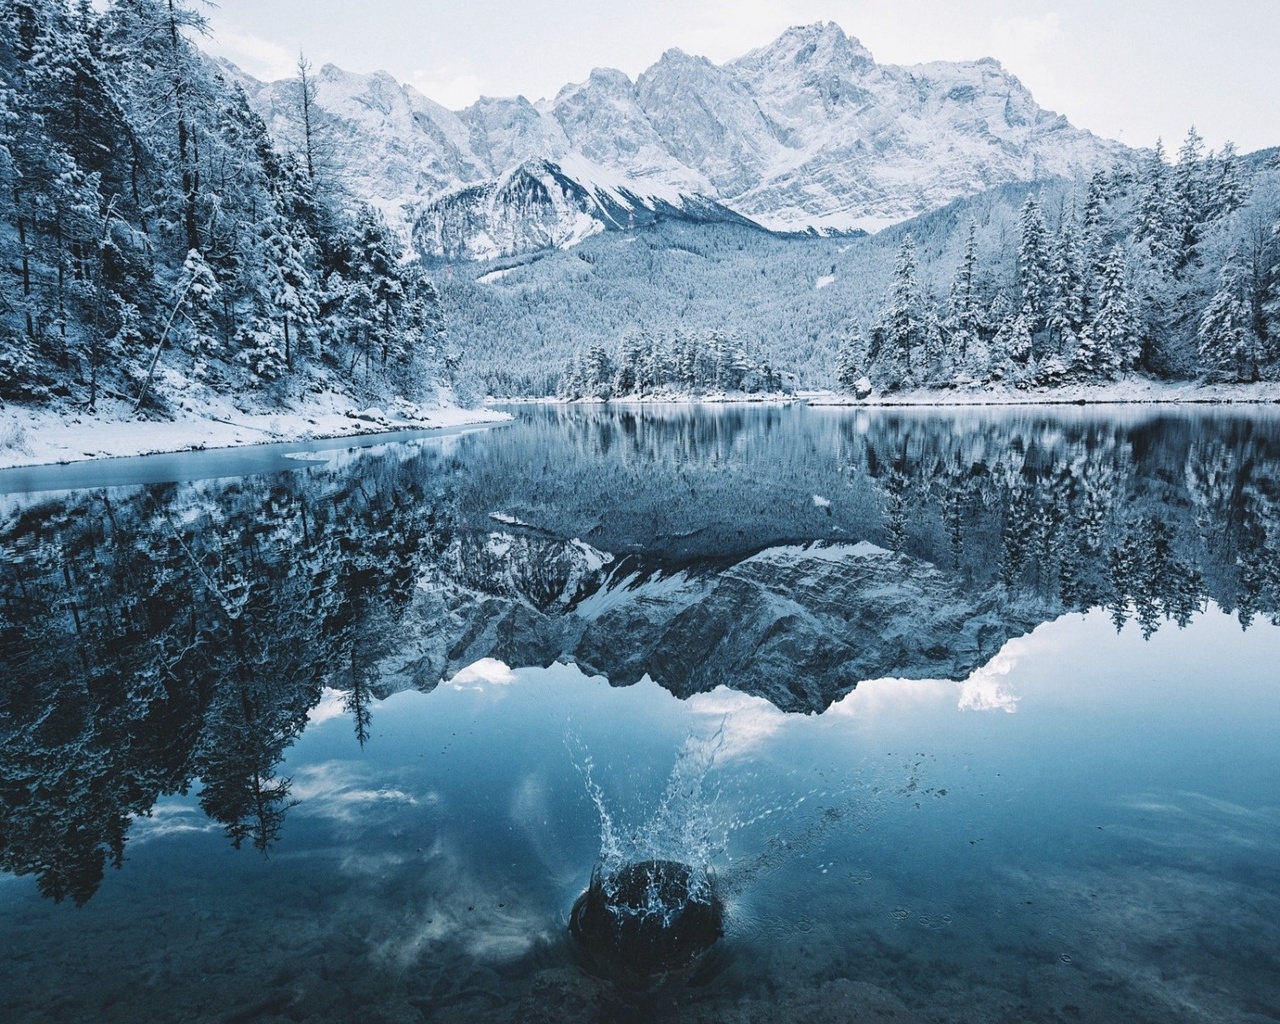 , , , , , , , , , trees, reflection, lake, mountains, rocks, snow, nature, forest, winter